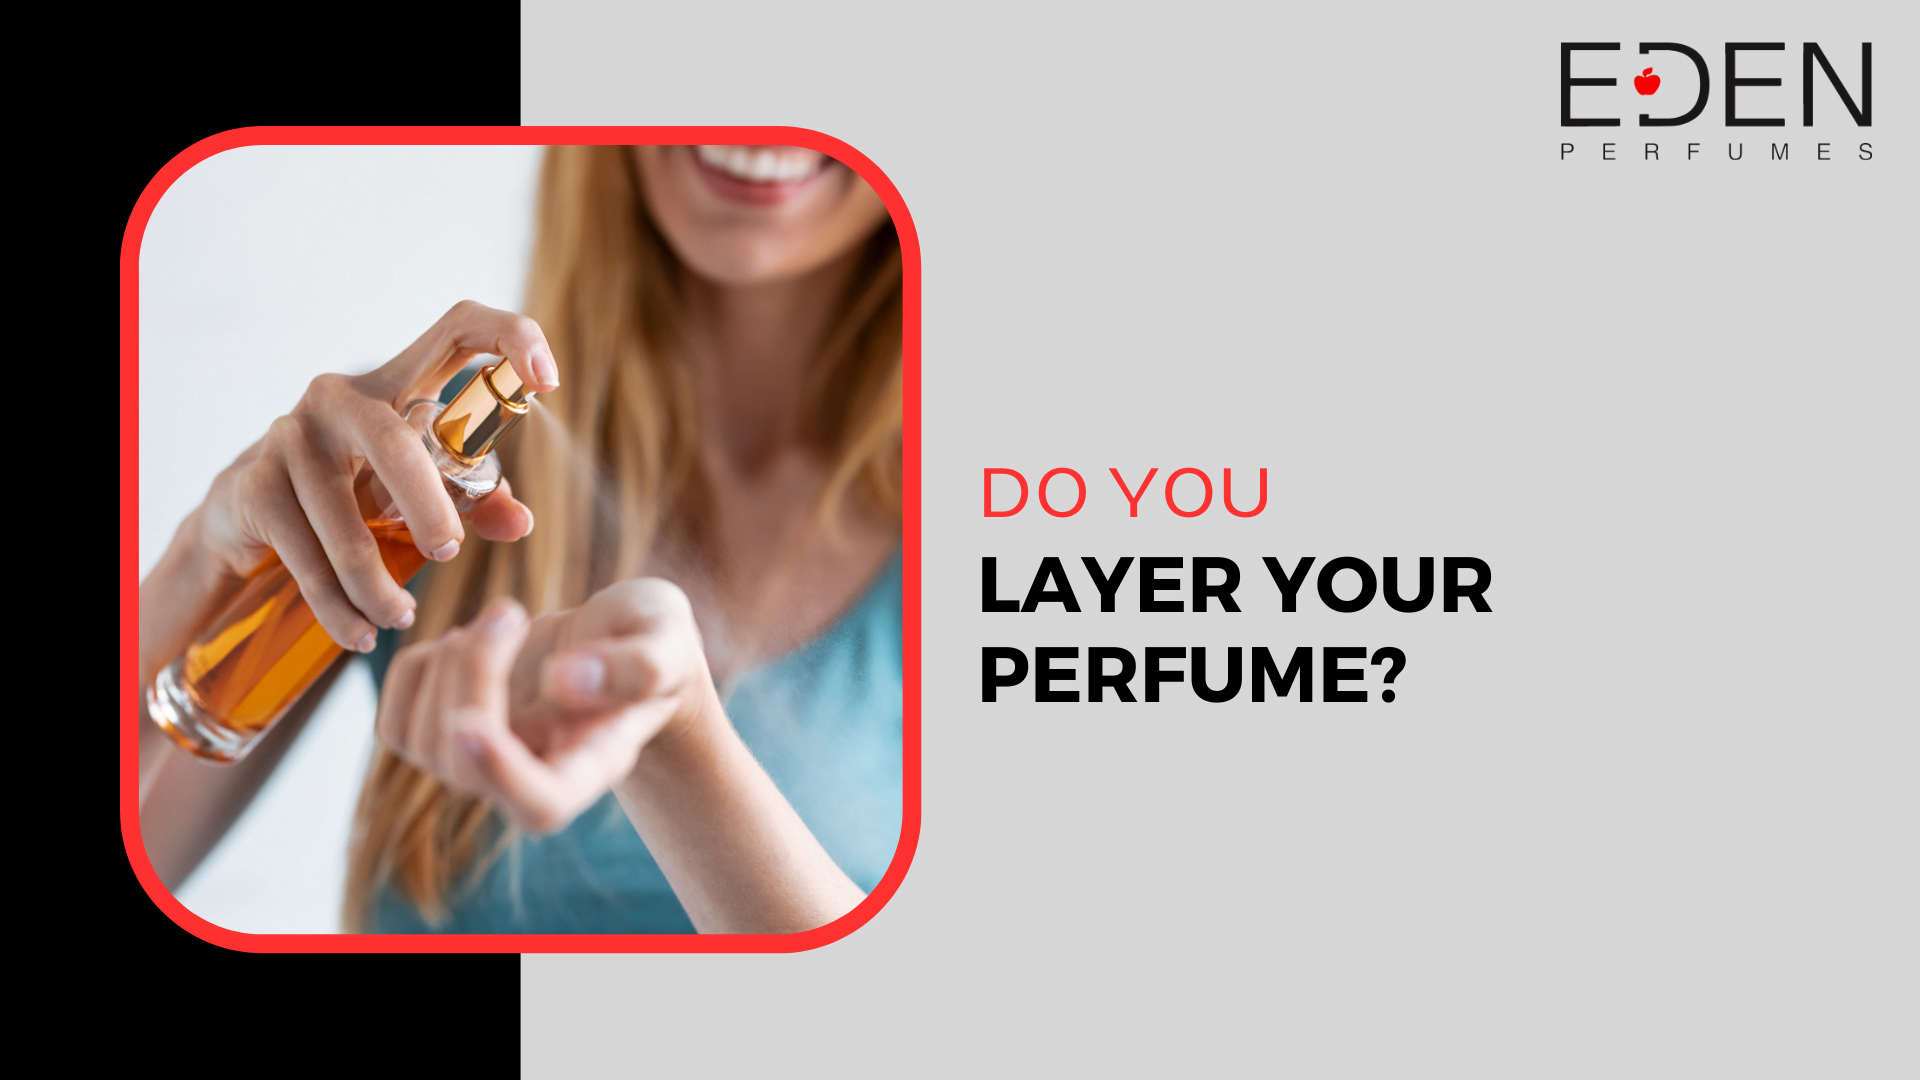 Do you layer your perfume?